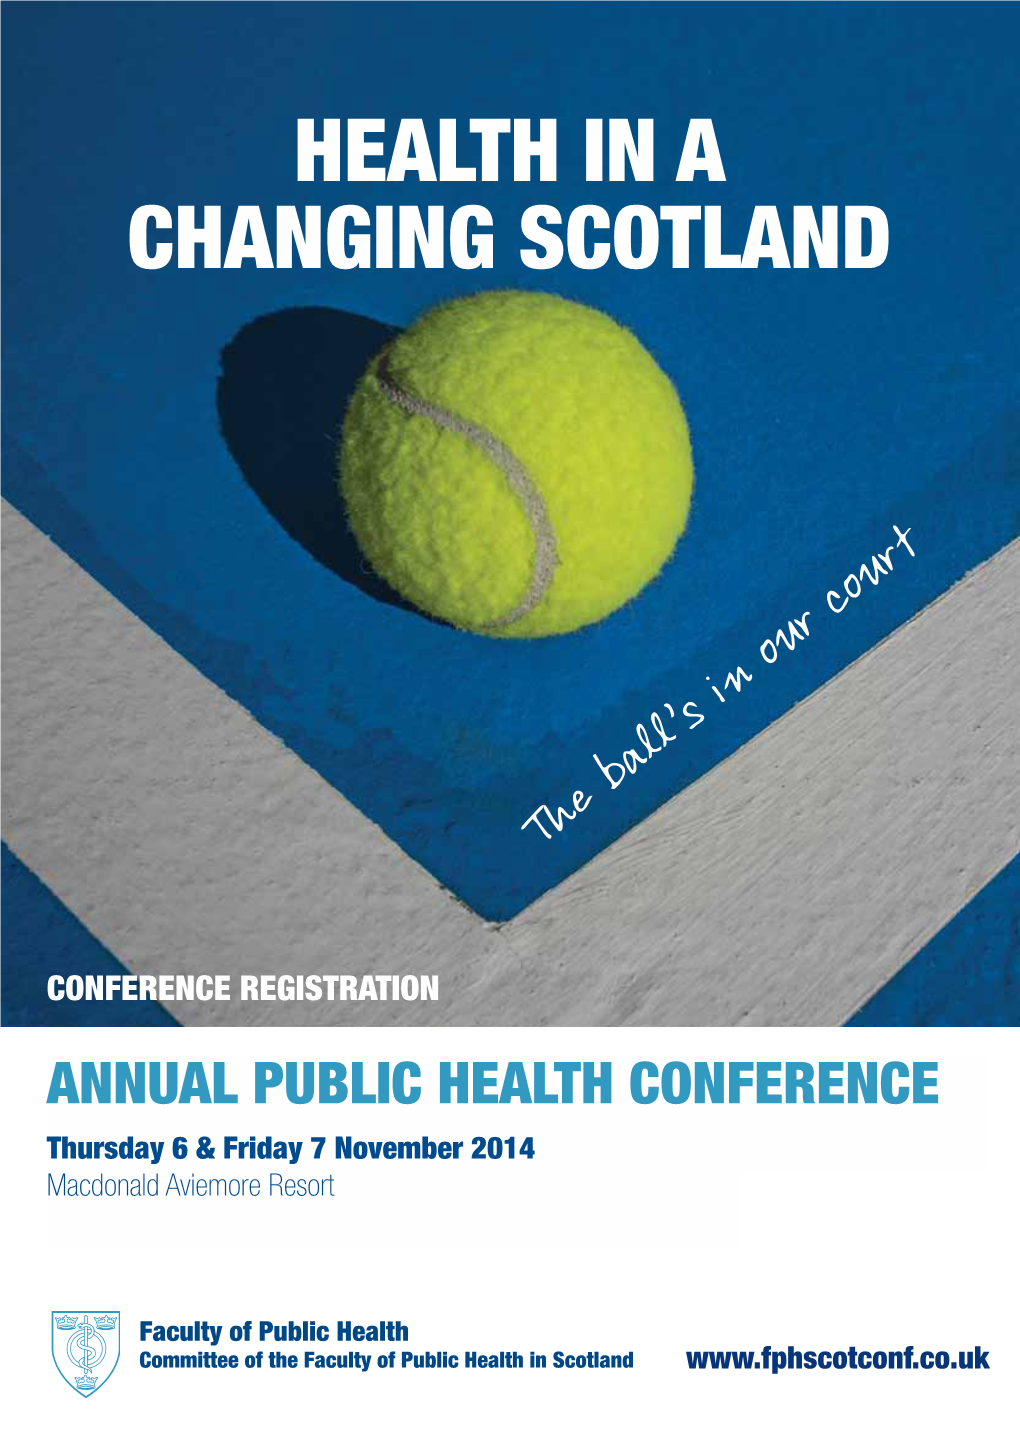 Health in a Changing Scotland